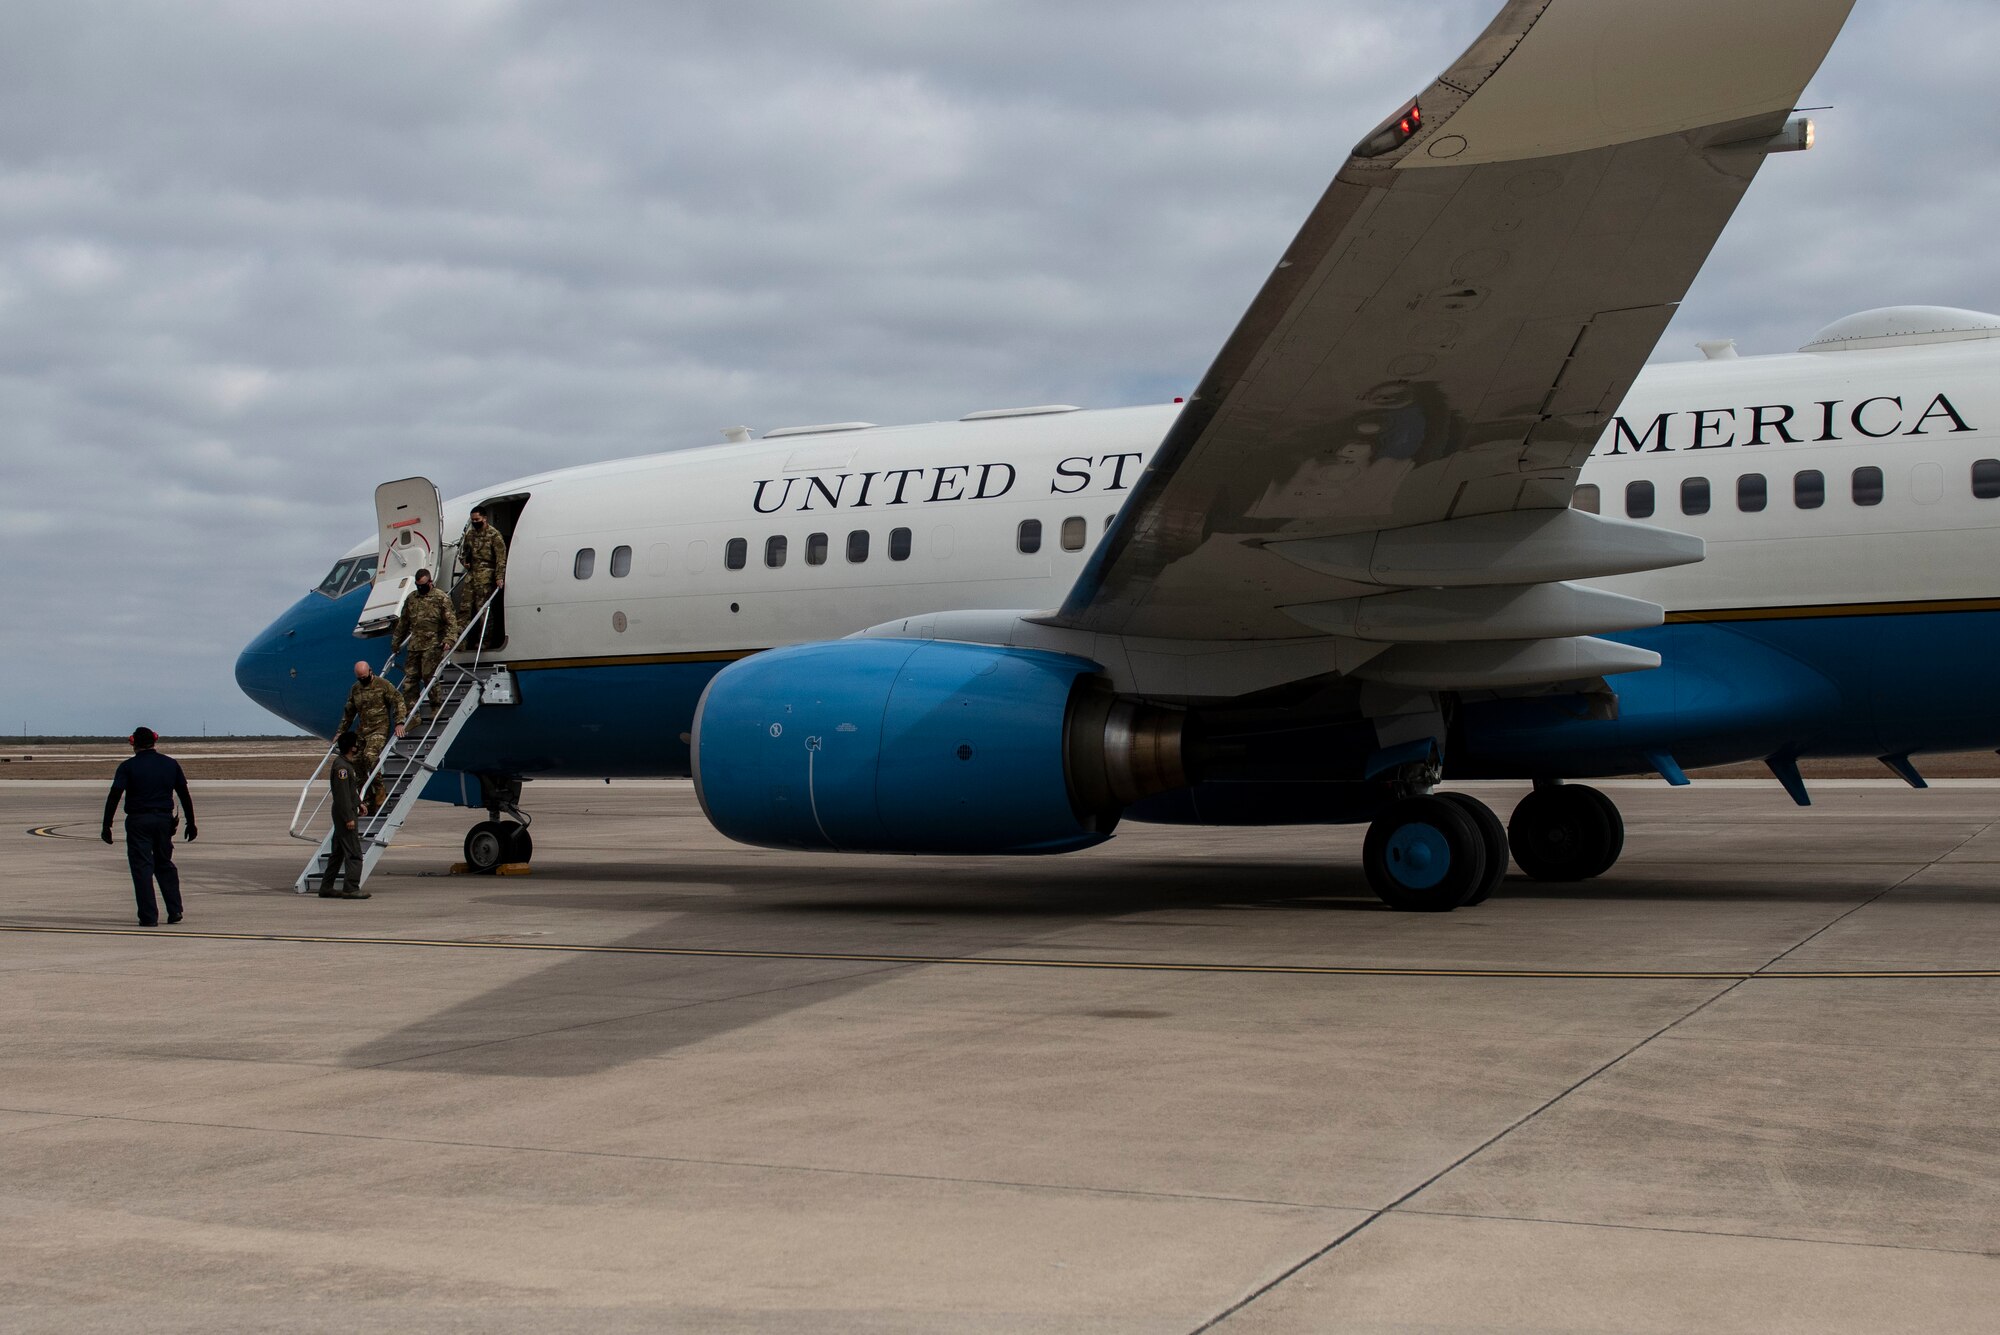 The crew from the 89th Airlift Wing at Joint Base Andrews, Md., departs their C-40B on Nov. 18, 2020 Laughlin Air Force Base, Texas. The C-40B/C provides safe, comfortable and reliable transportation for U.S. leaders to locations around the world. The C-40B's primary customers are the combatant commanders, and the C-40C customers include members of the Cabinet and Congress. The aircraft also performs other operational support missions. (U.S. Air Force photo by Airman 1st Class David Phaff)